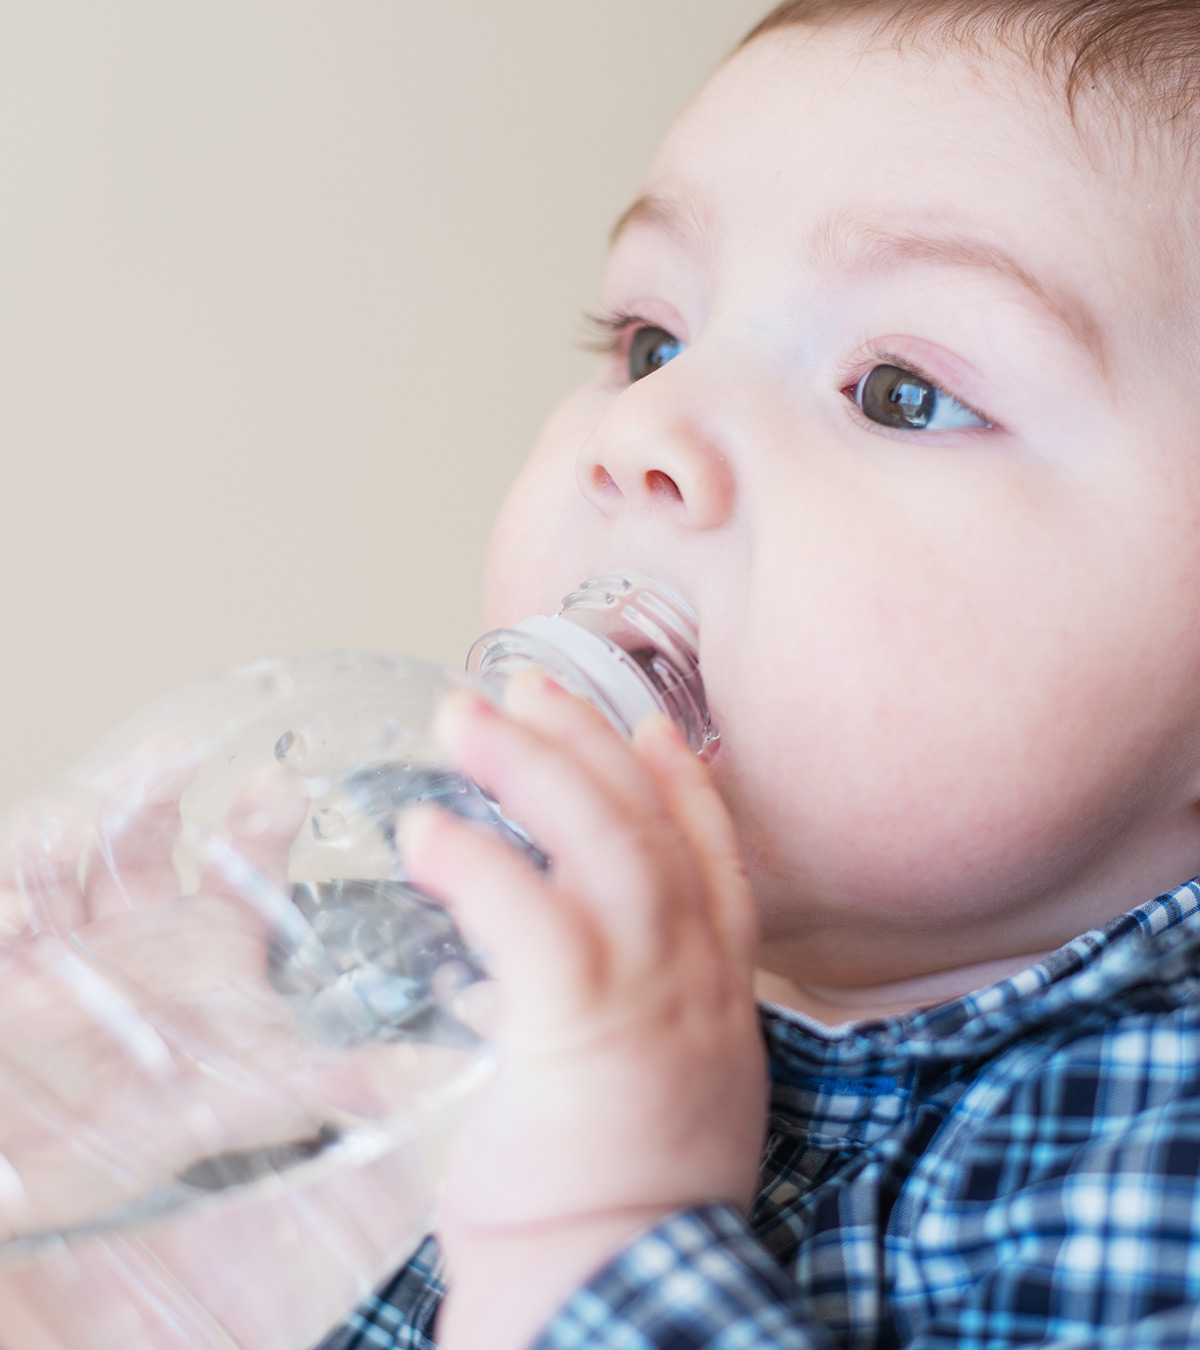 Bottled Water For Babies: When Can They Drink It And How Does It Differ From Baby Water?